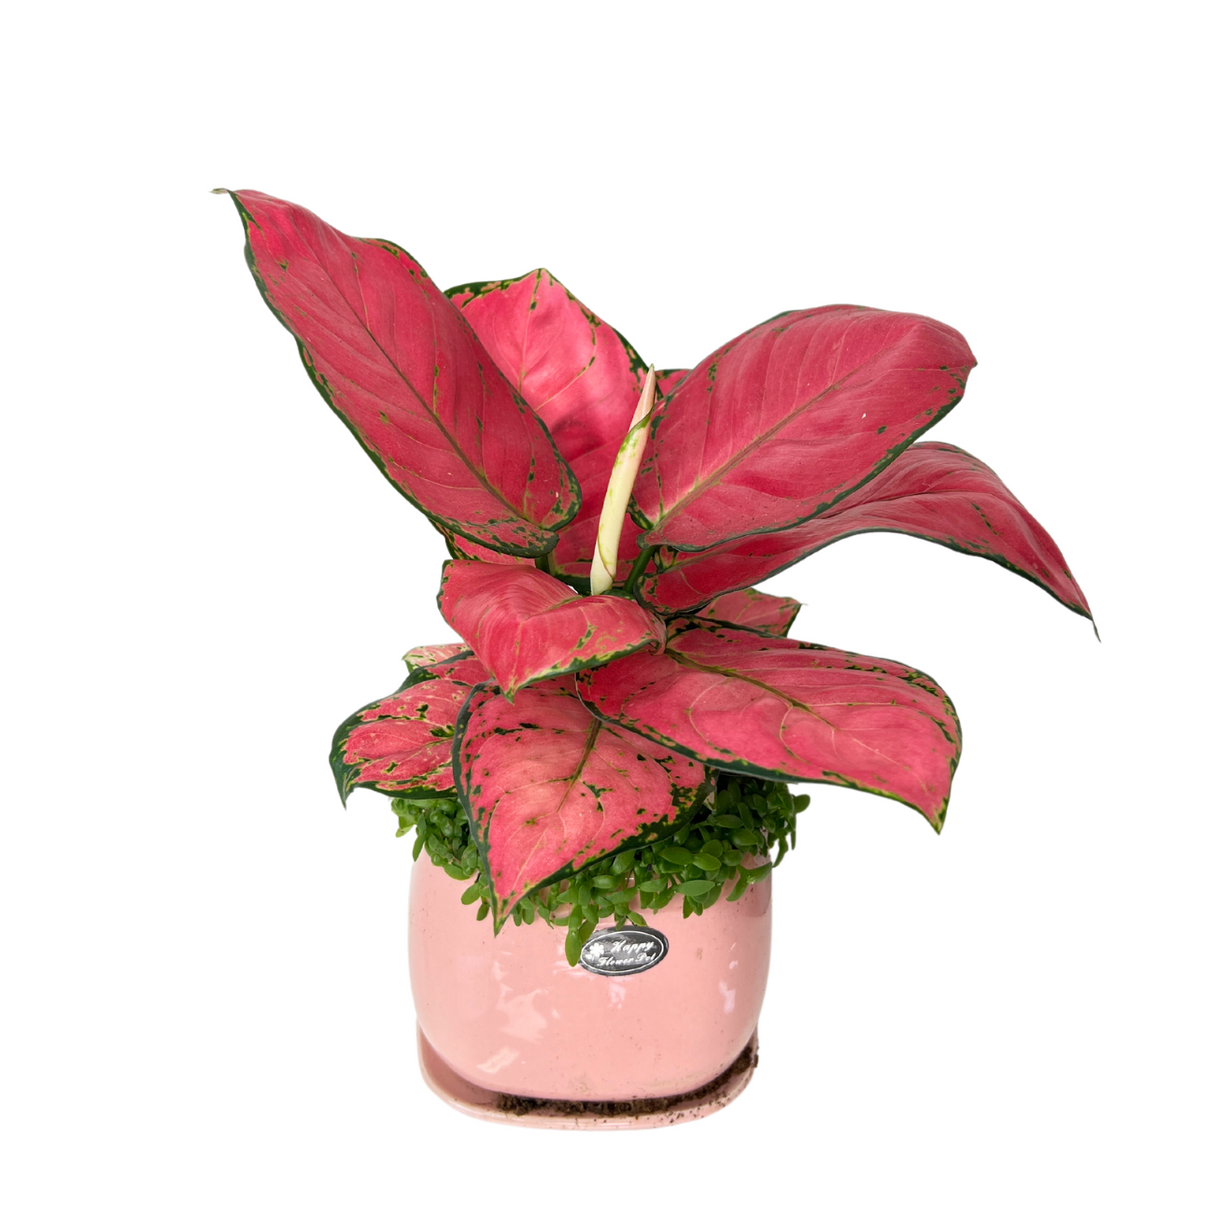 Aglaonema Plant with Dragon Fruit Seed